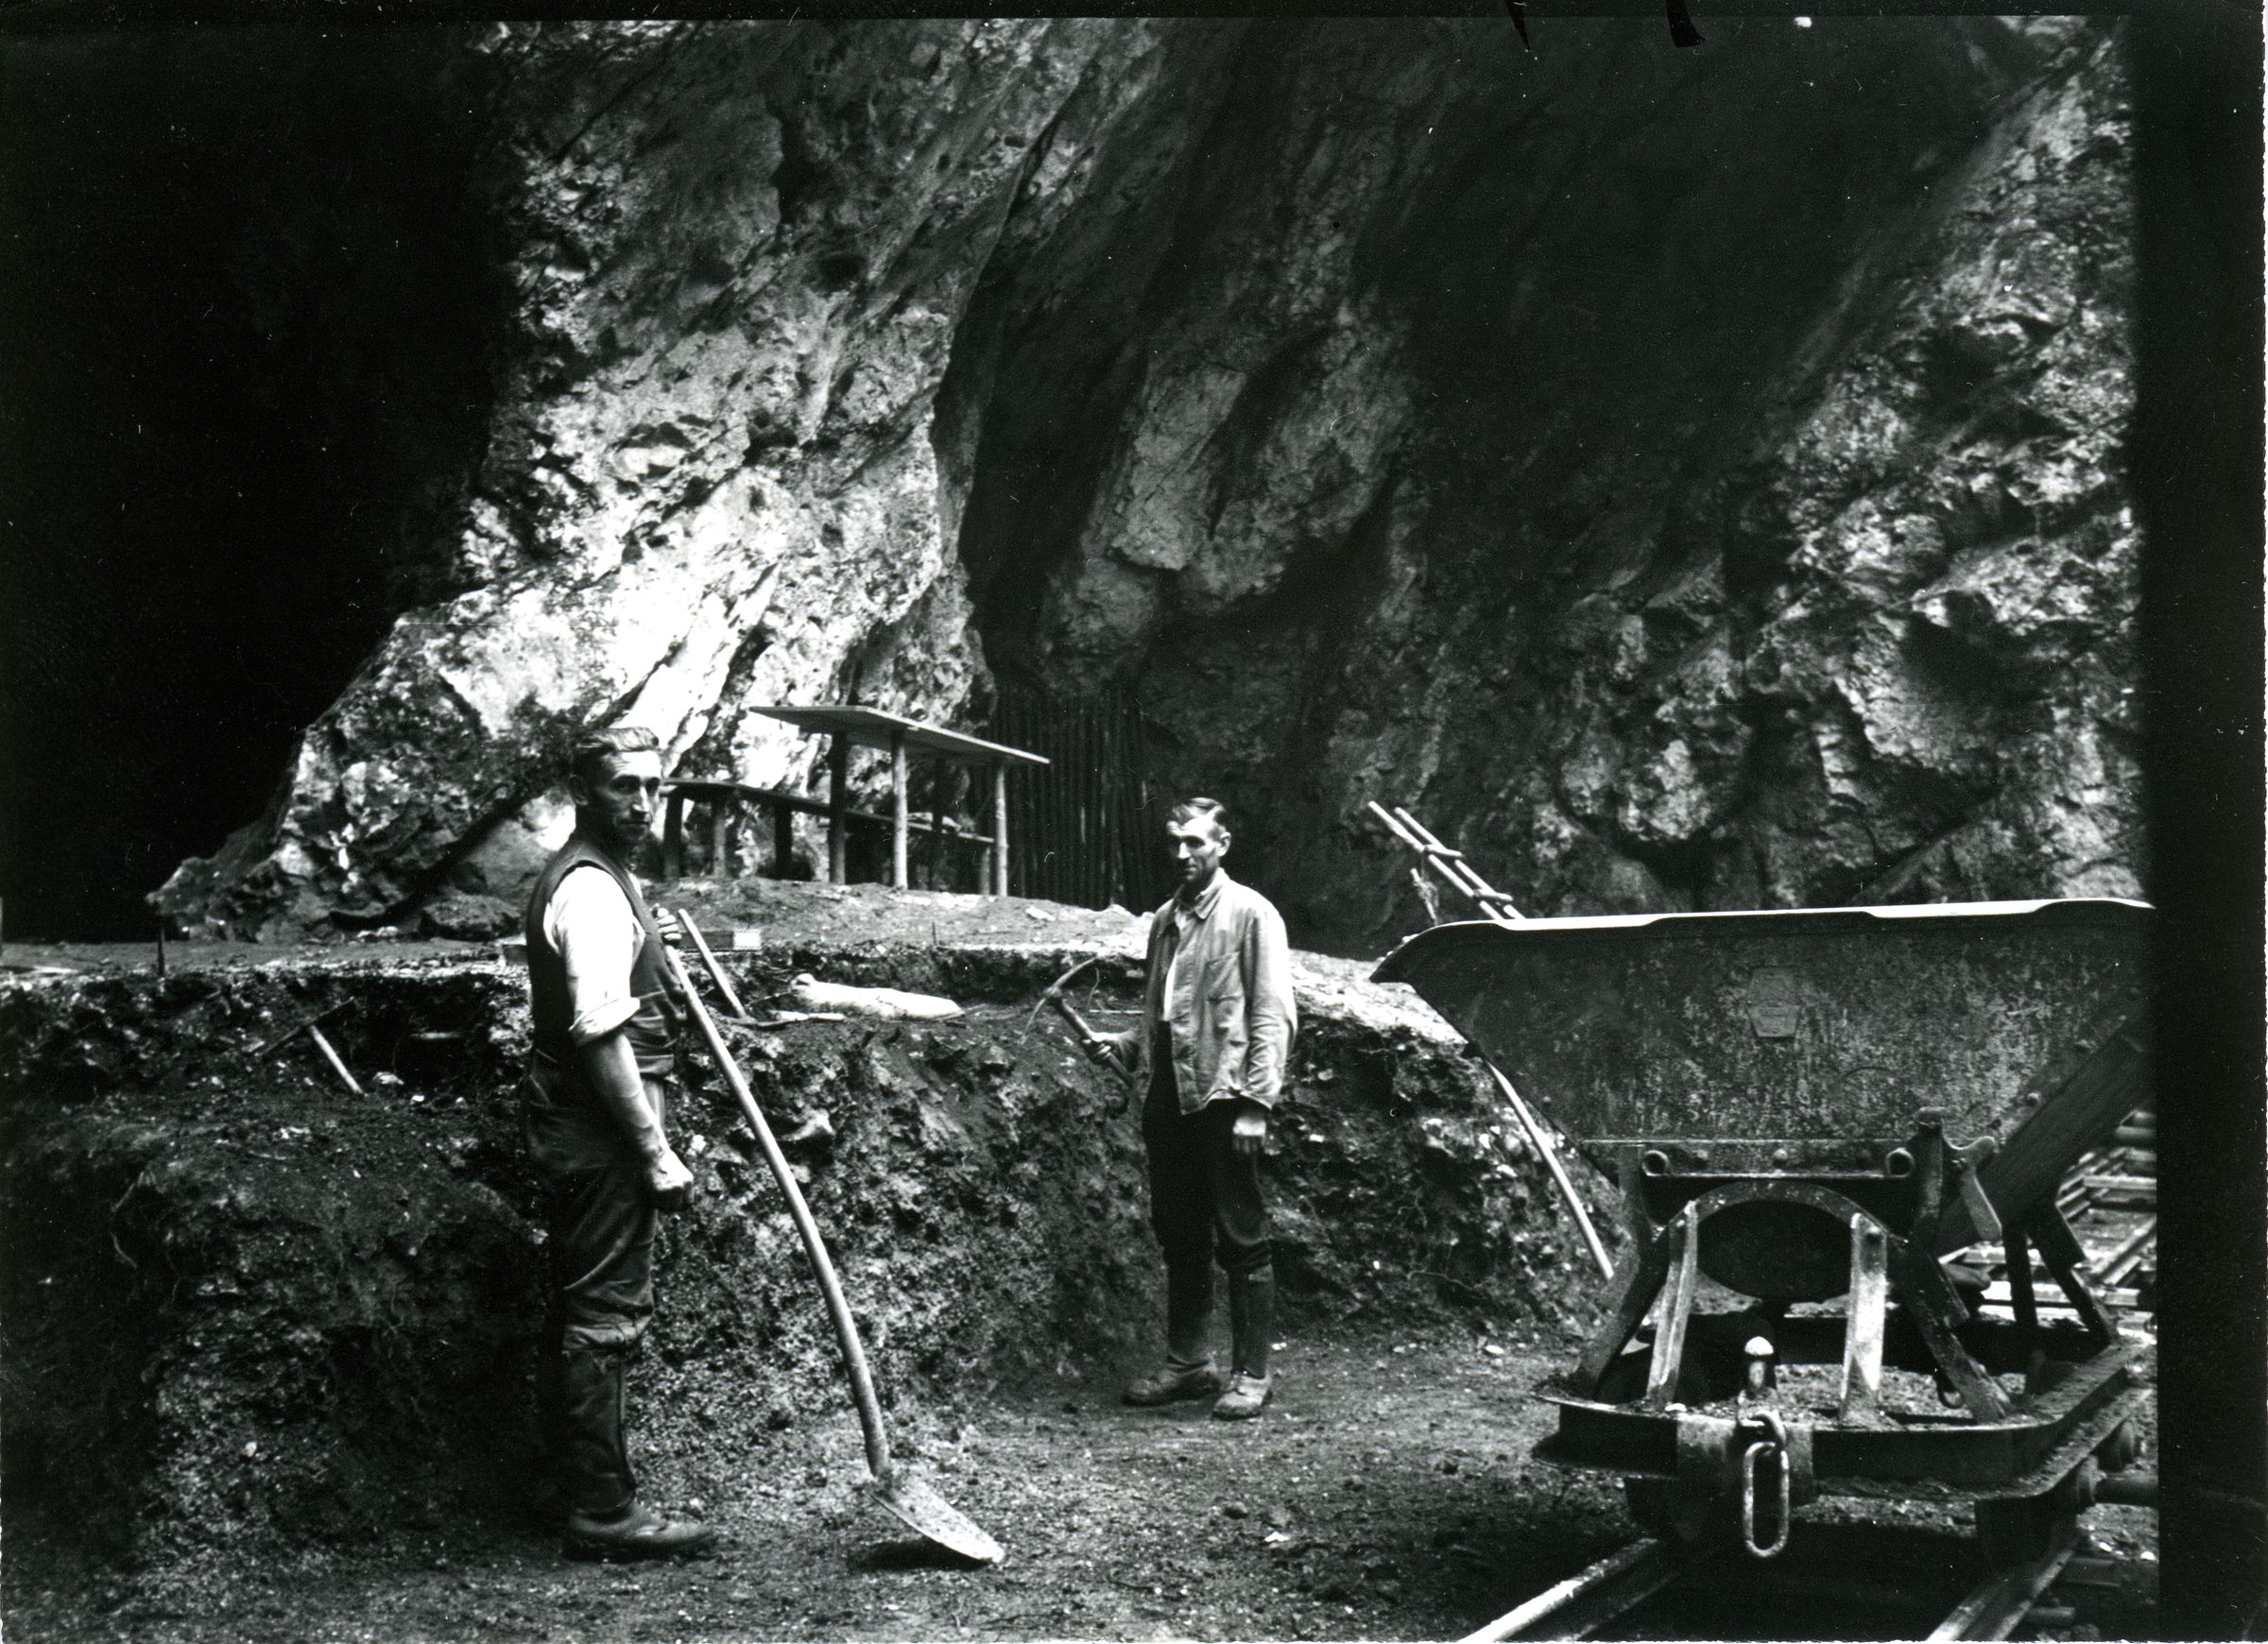 The German cave where the Neanderthal thigh bone was discovered in 1937.